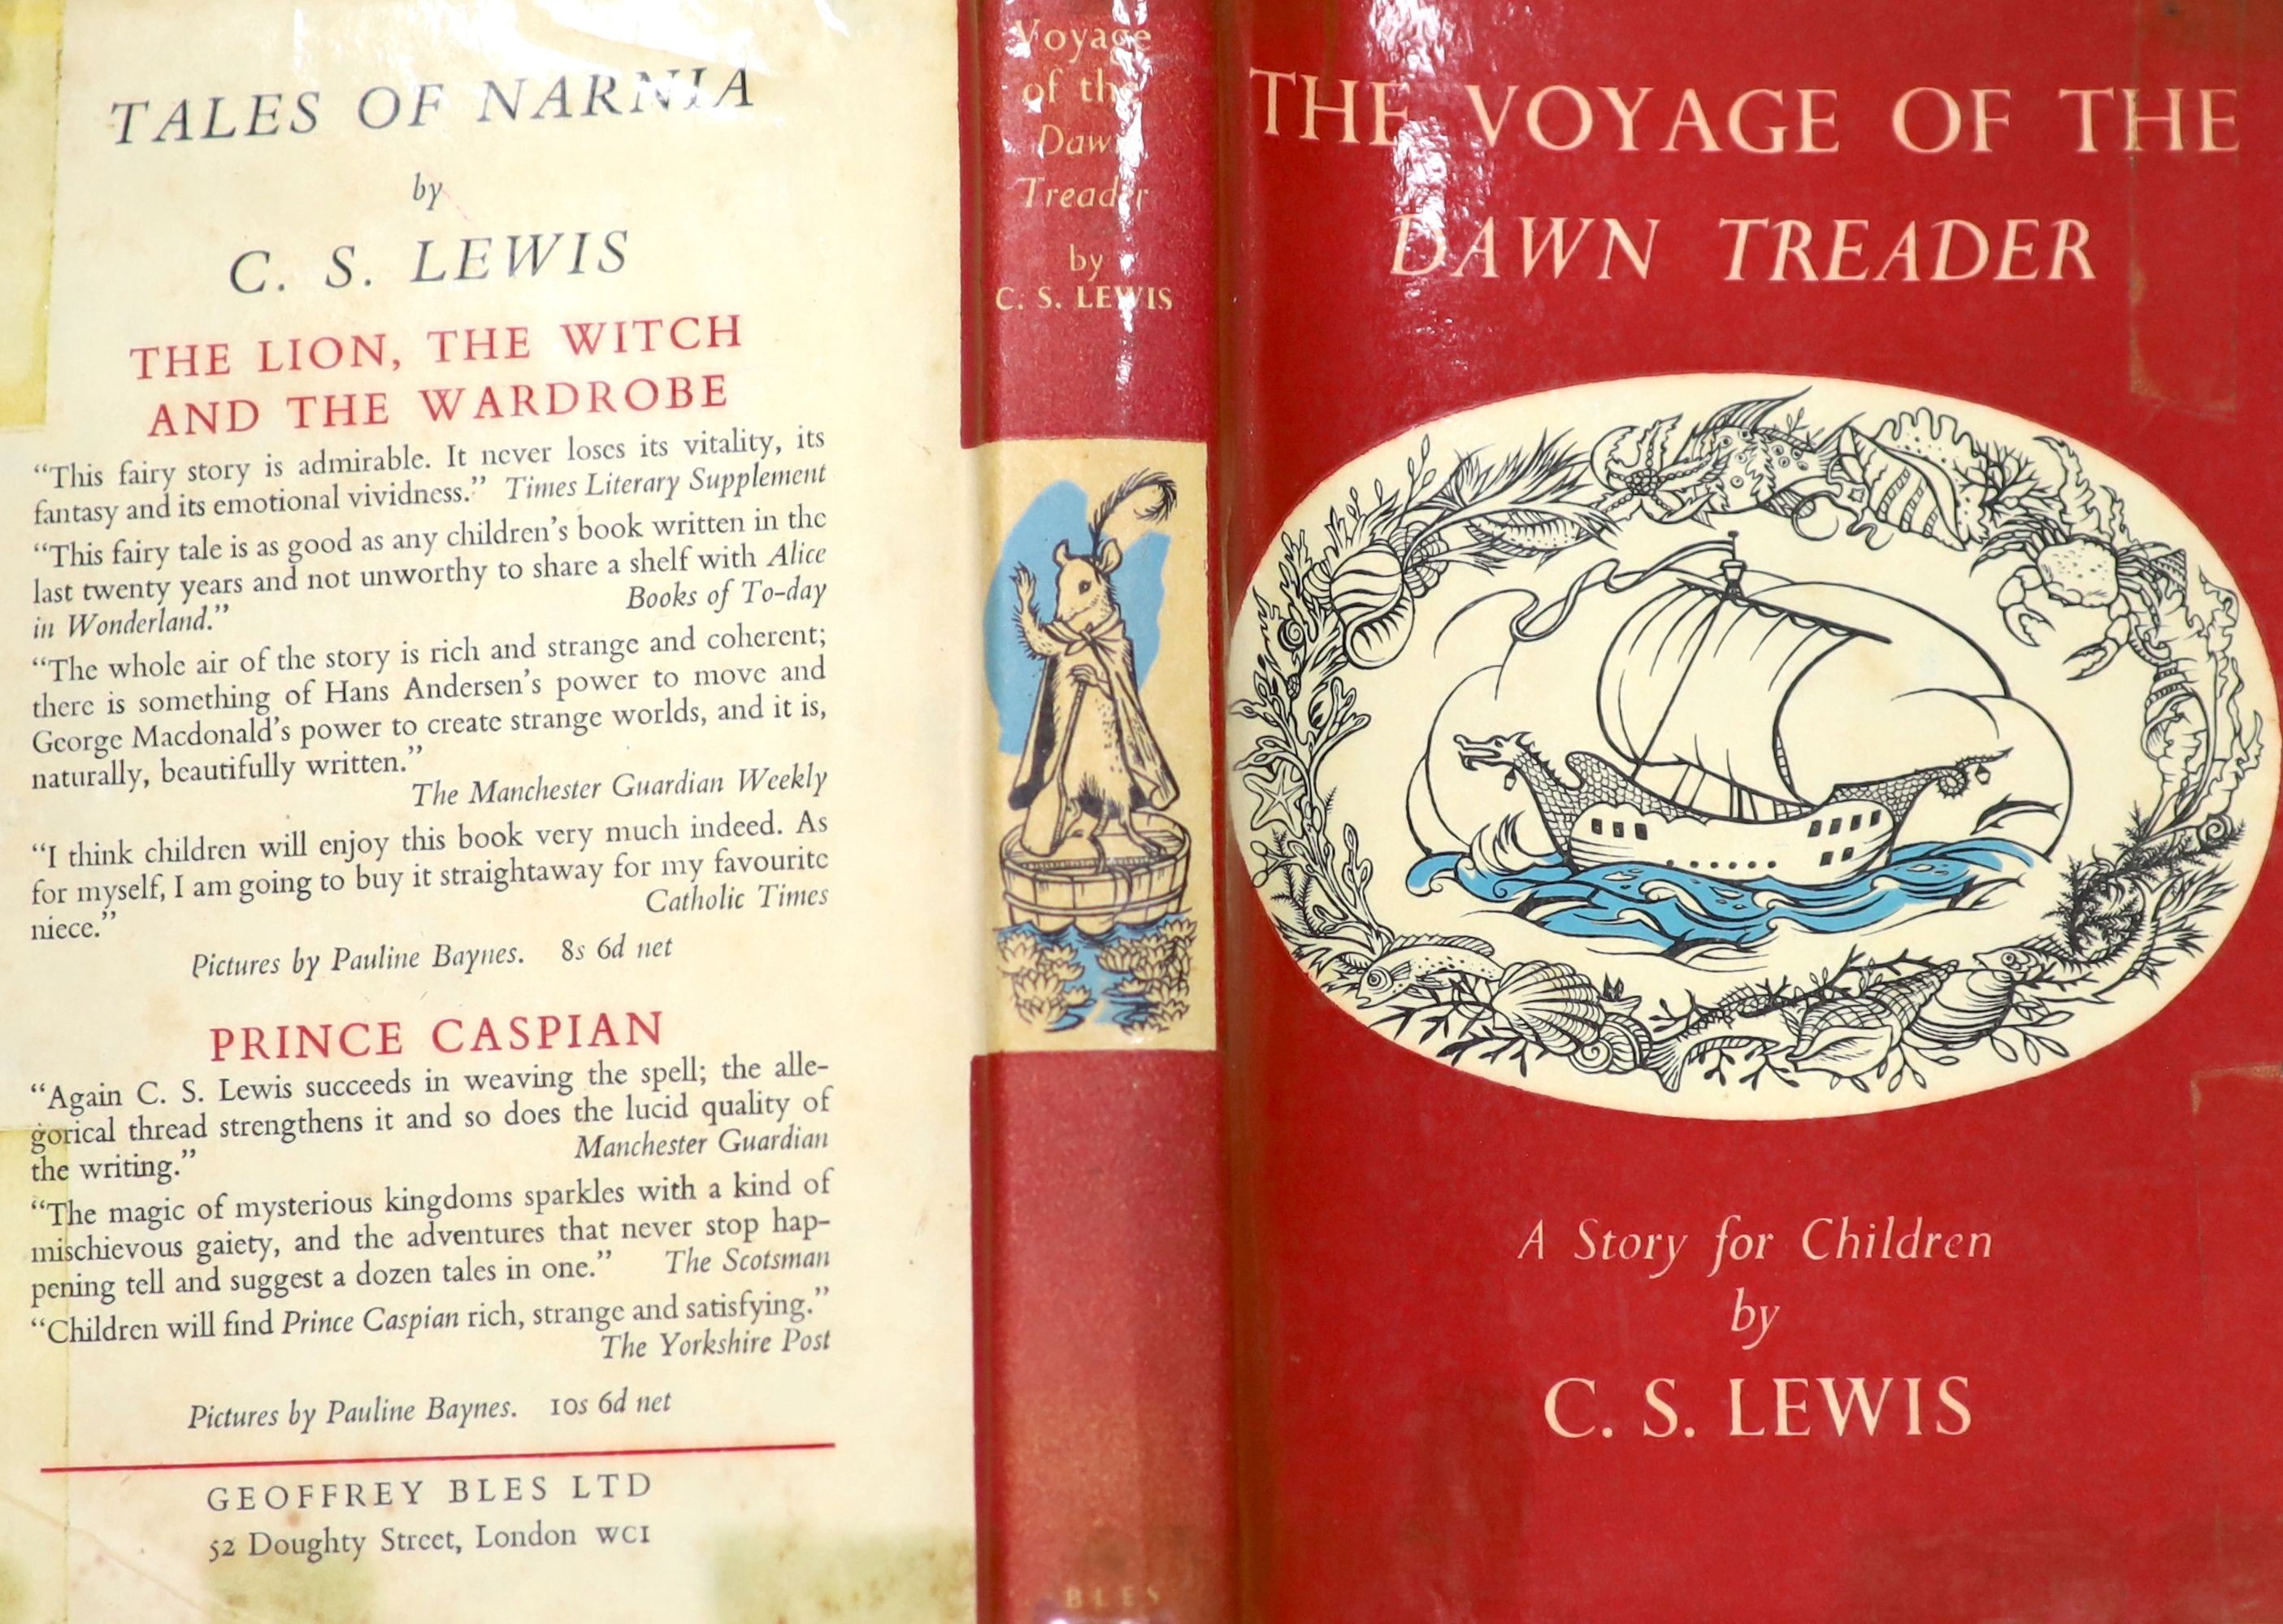 Lewis, Clive Staples - The Voyage of the Dawn Treader, 1st edition, 8vo, illustrated by Pauline Baynes, original cloth, in unclipped d/j, rear end papers spotted, Geoffrey Bles, London, 1952